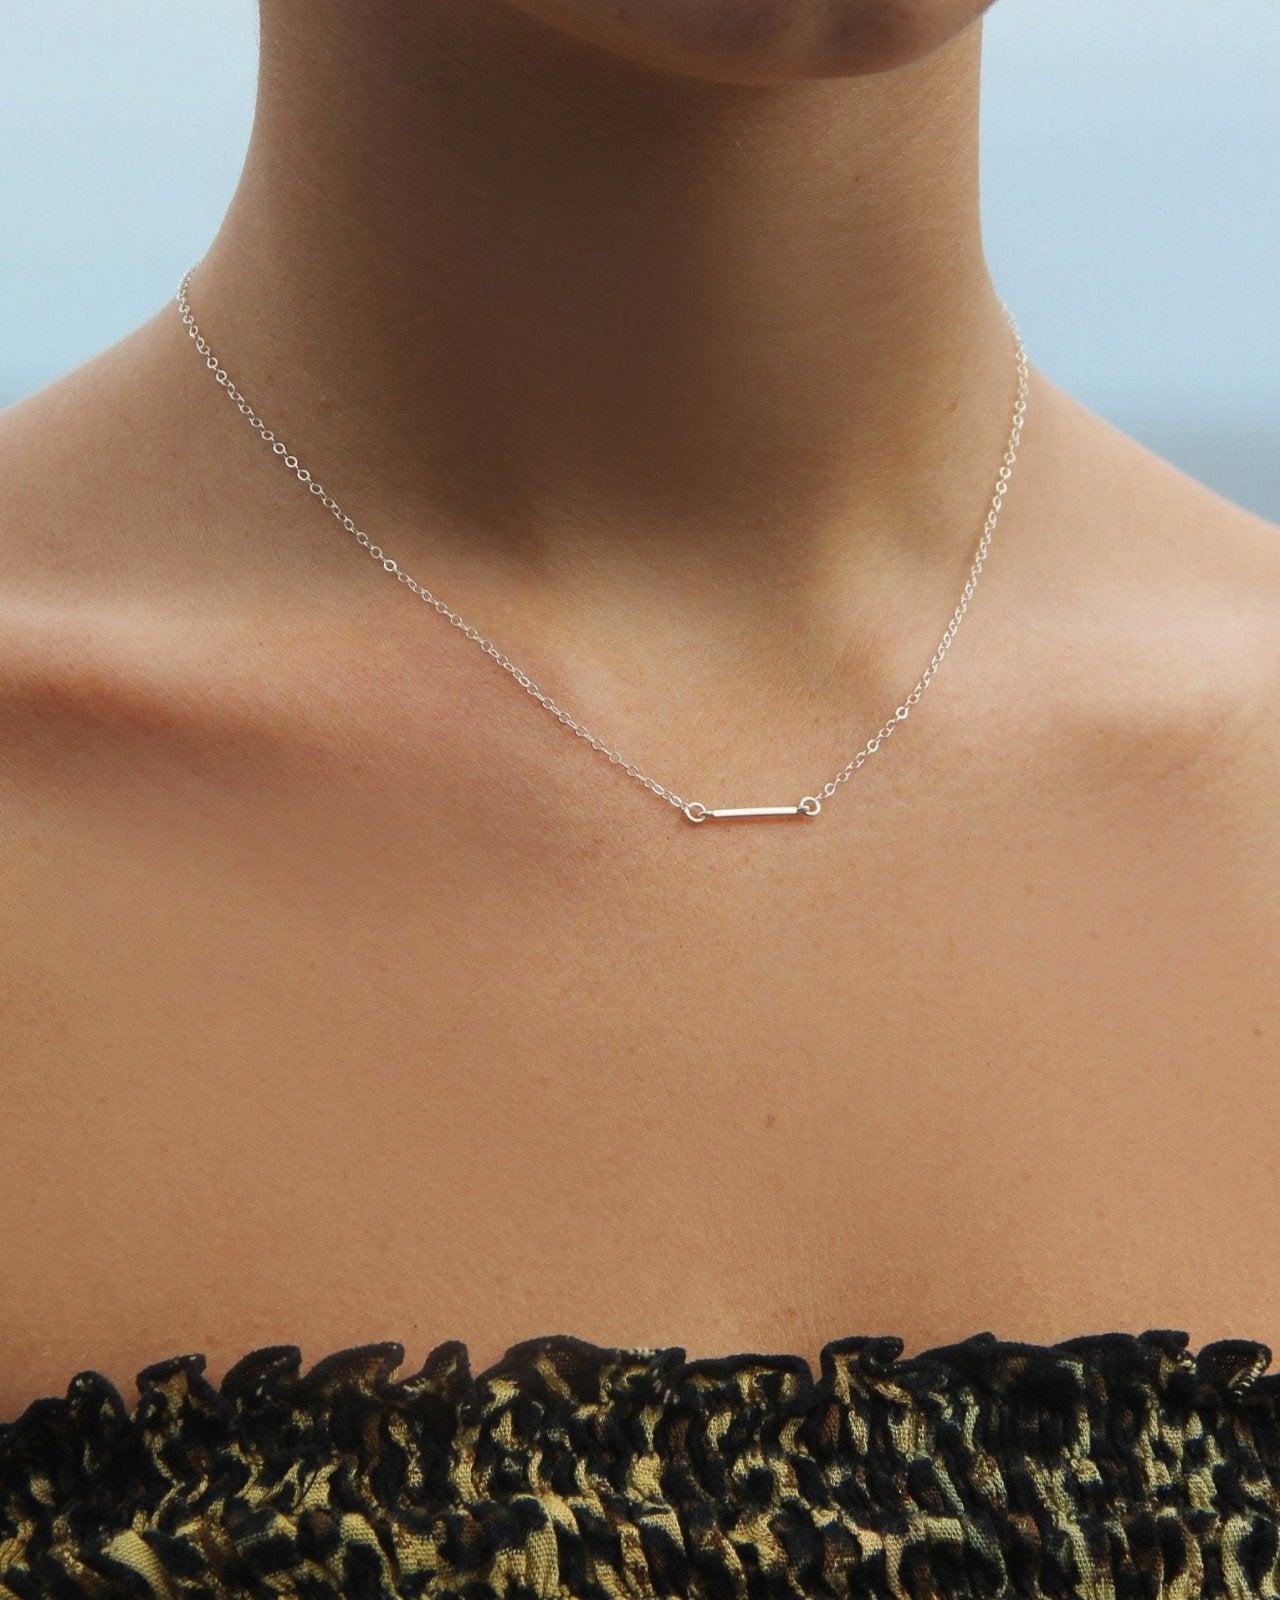 THIN BAR NECKLACE- Sterling Silver - The Littl - Deluxe Chain - 37cm (choker)